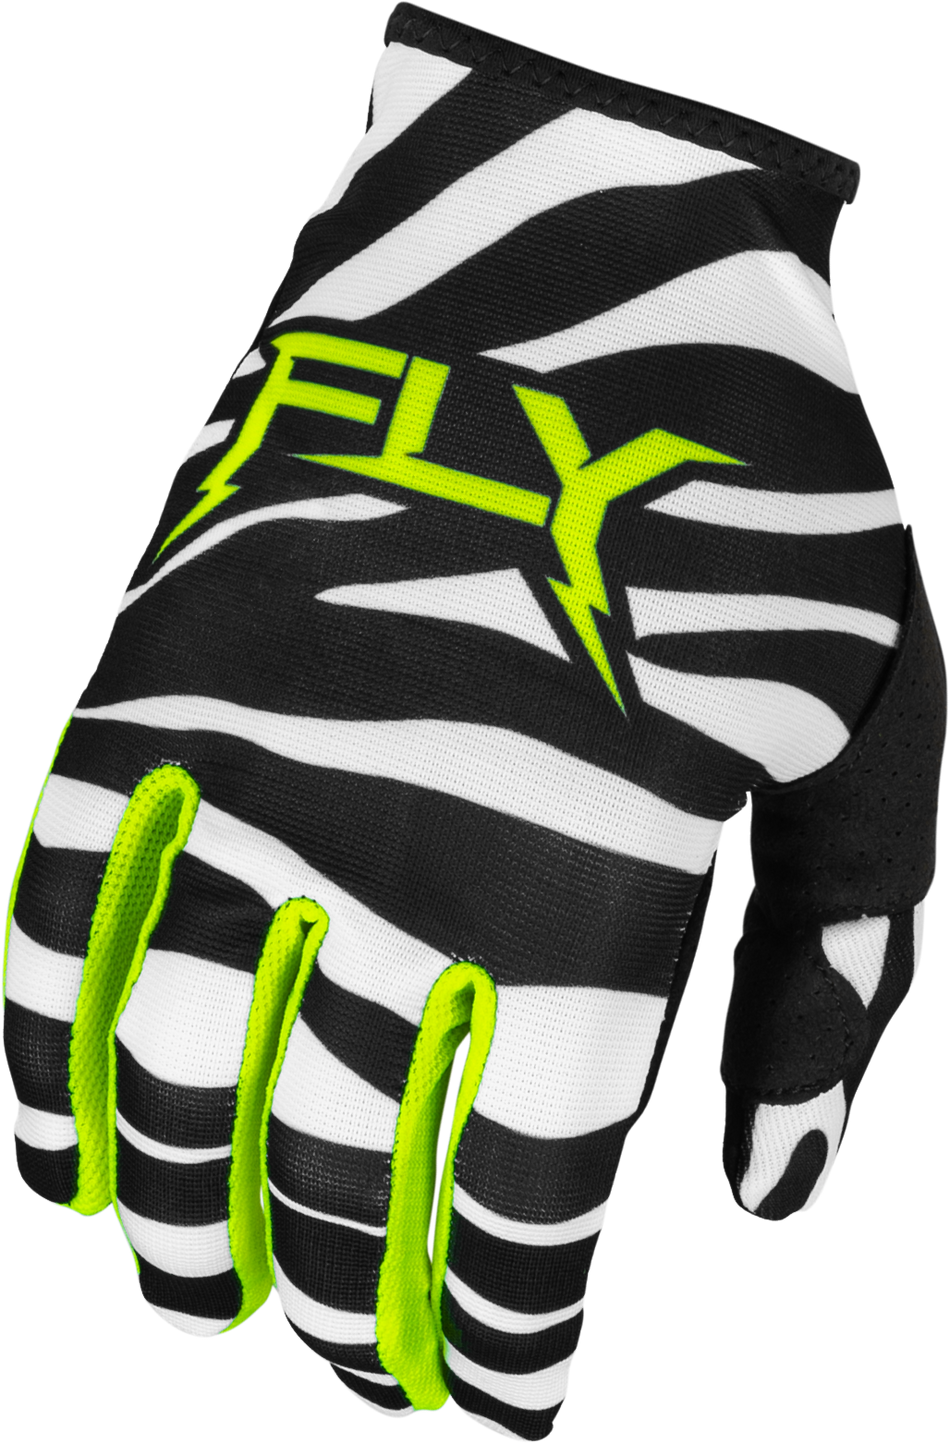 FLY RACING Lite Uncaged Gloves Black/White/Neon Green Xl 377-742X